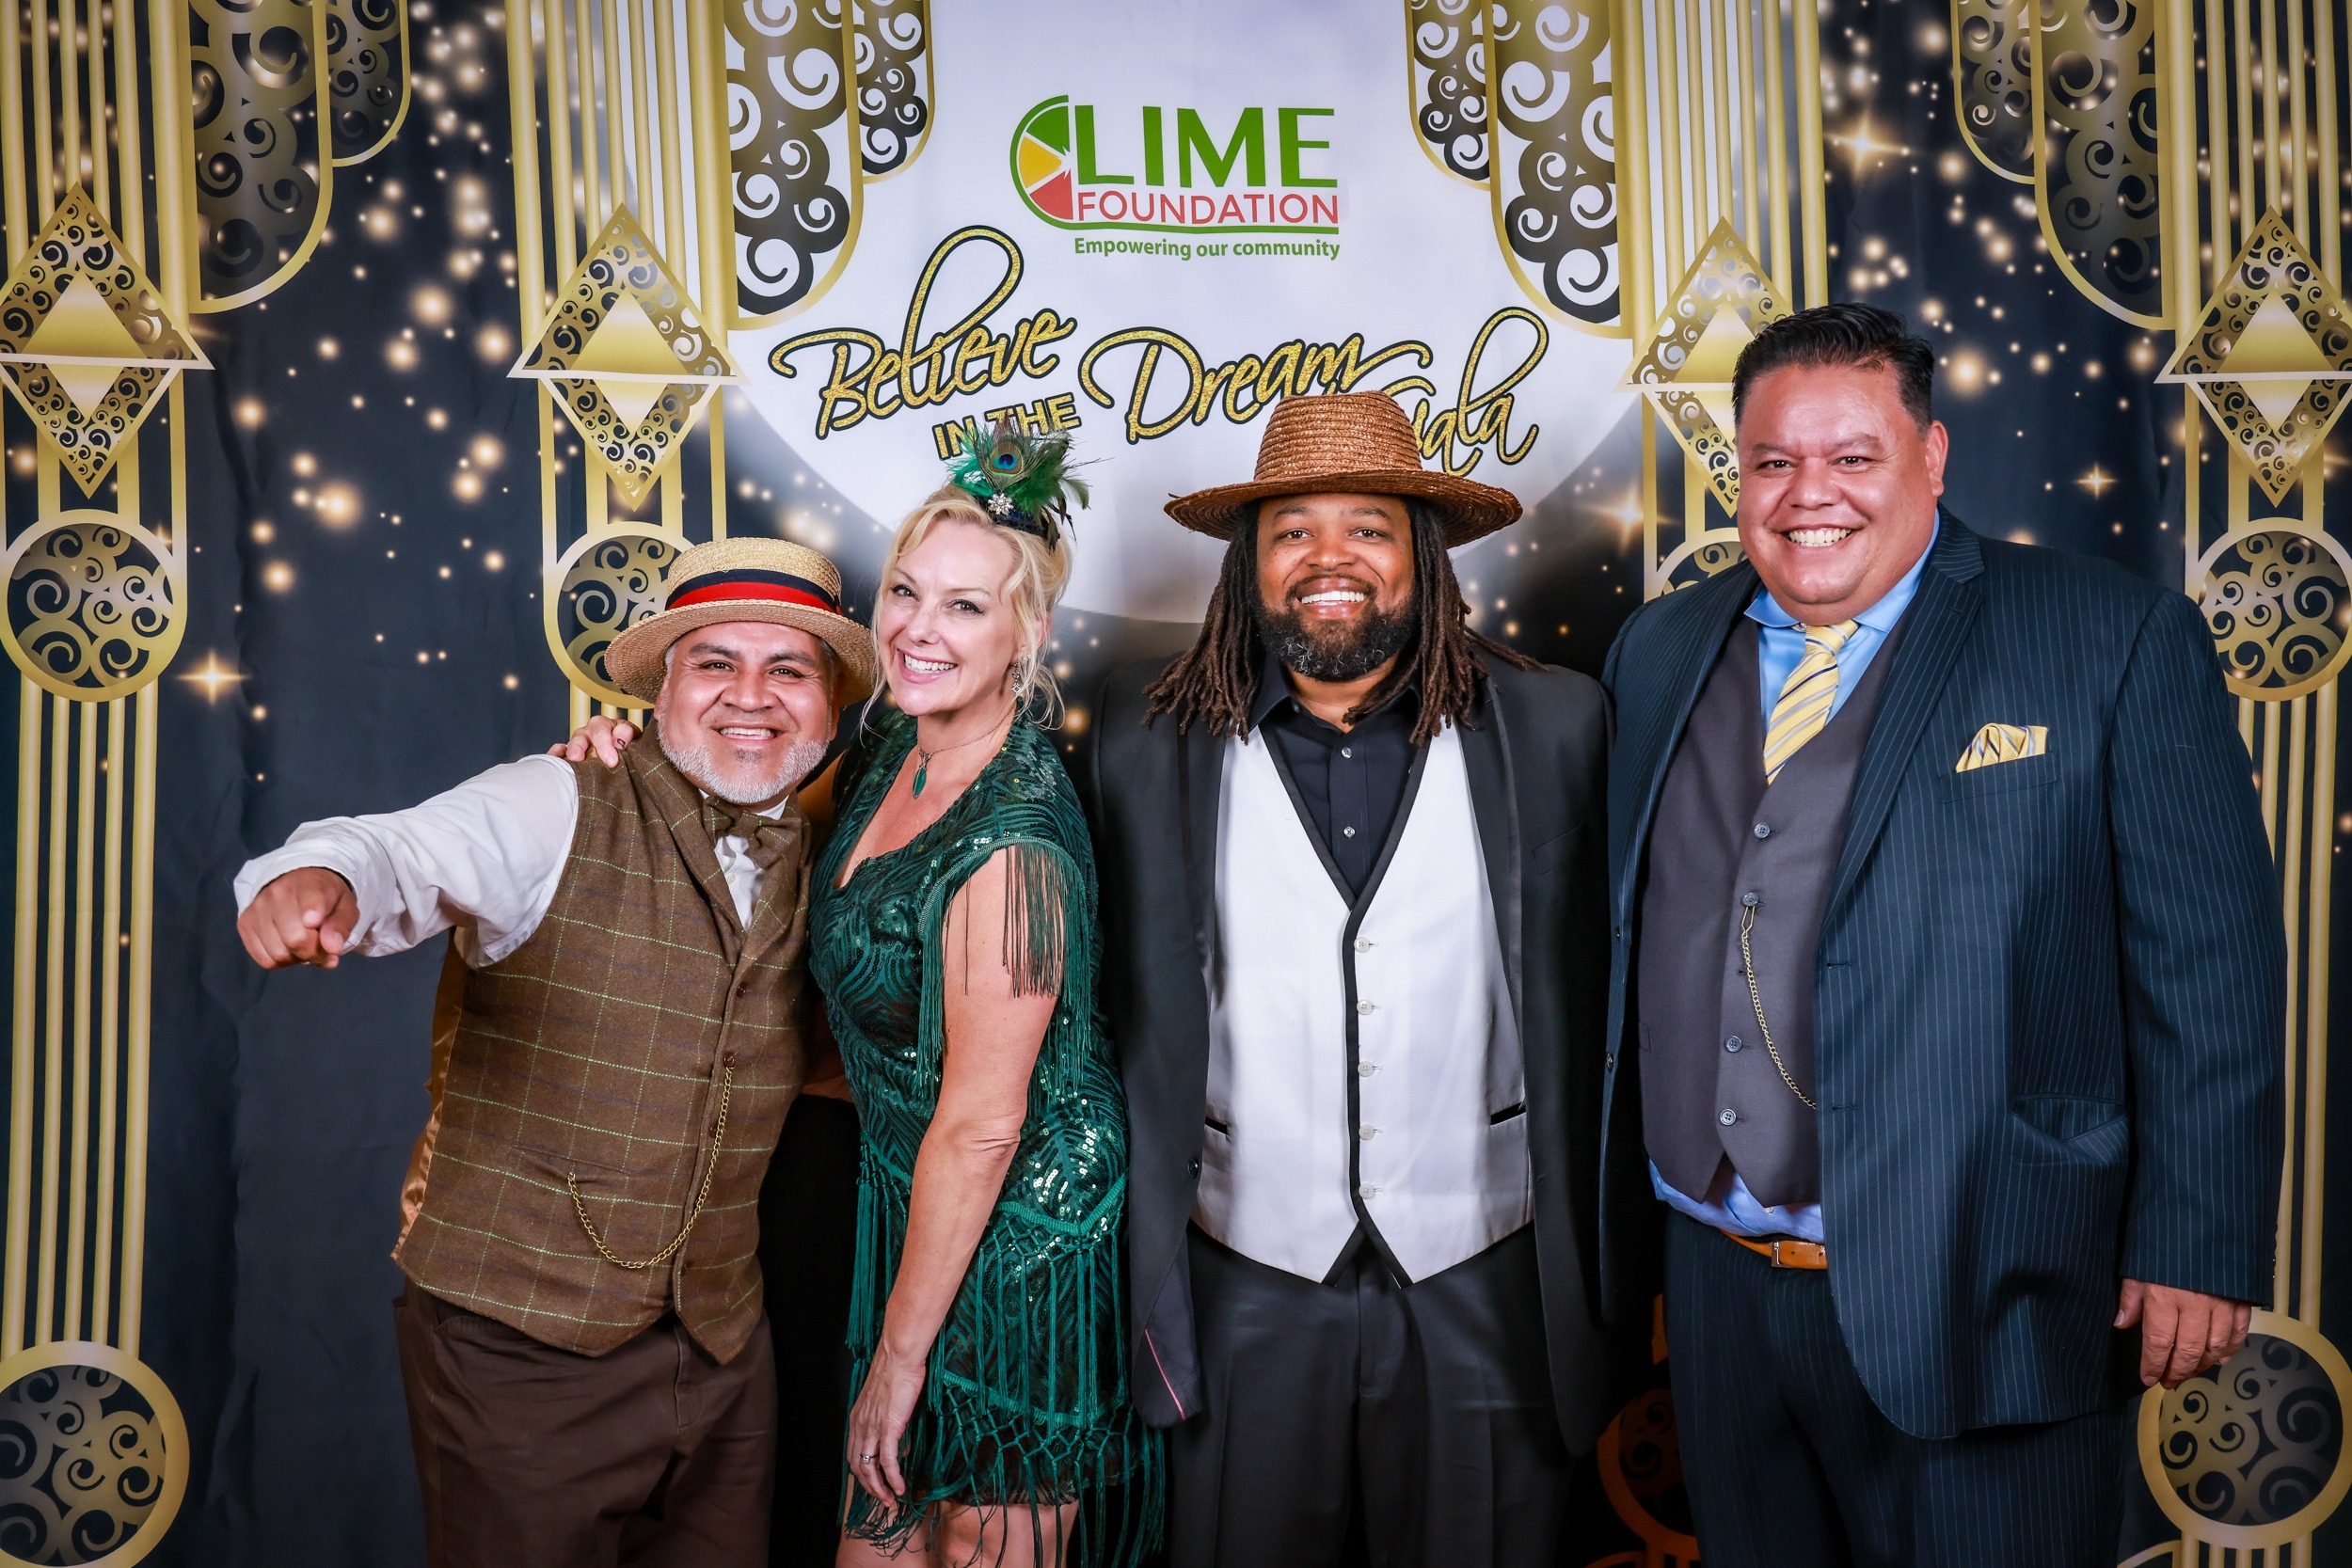 A group of people from Sonoma County's LIME Foundation posing for a photo.